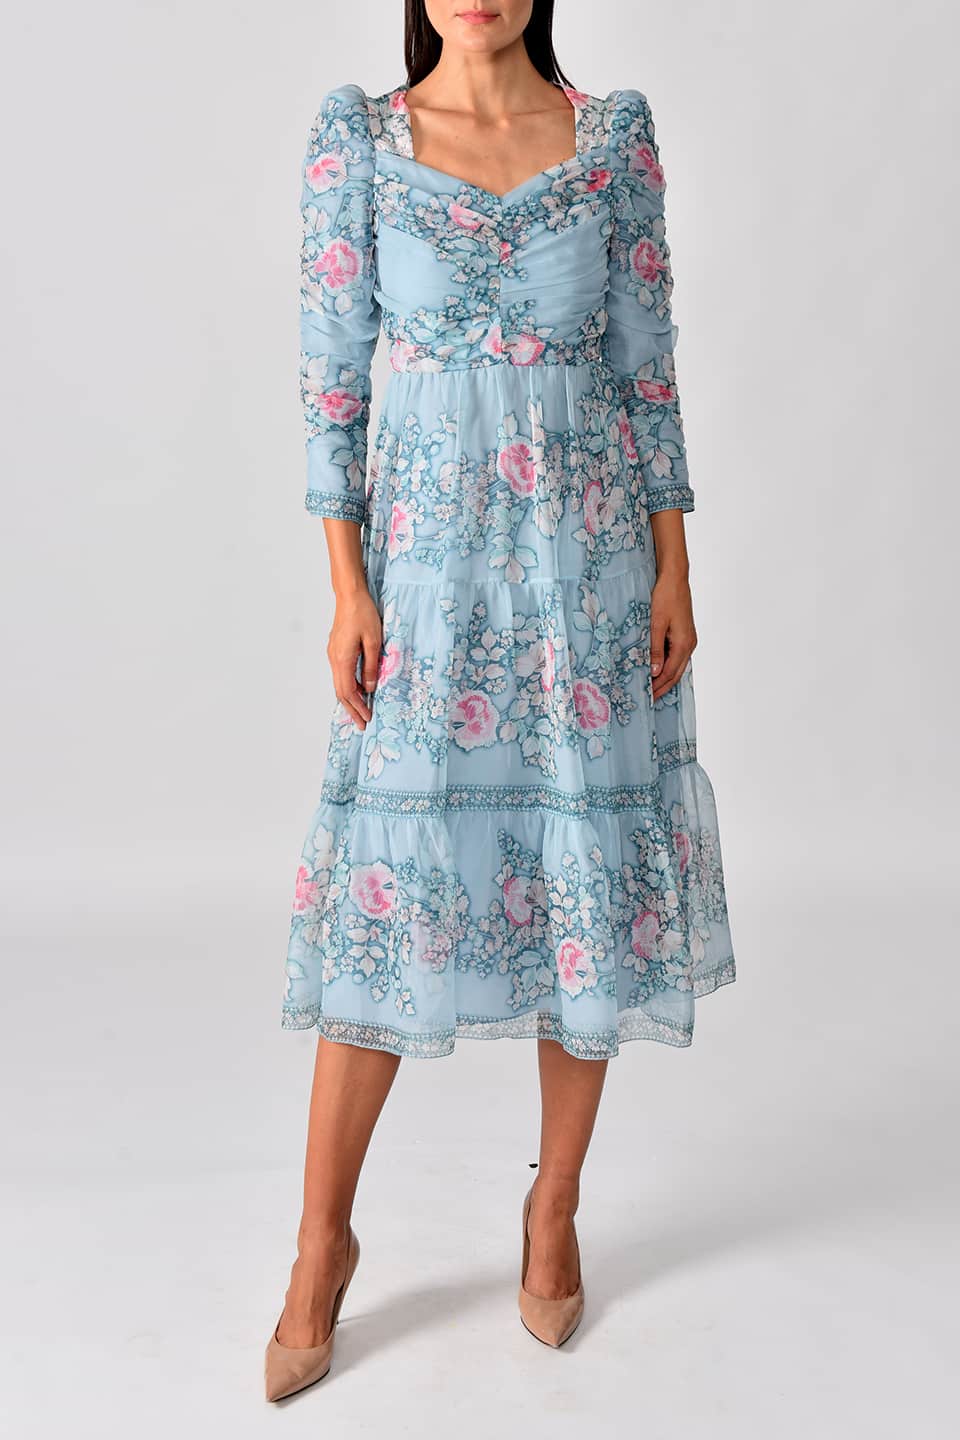 Thumbnail for Product gallery 1, Model wearing floral print silk chiffon tiered long dress in a pale blue color from stylist Vilshenho, posing in front view